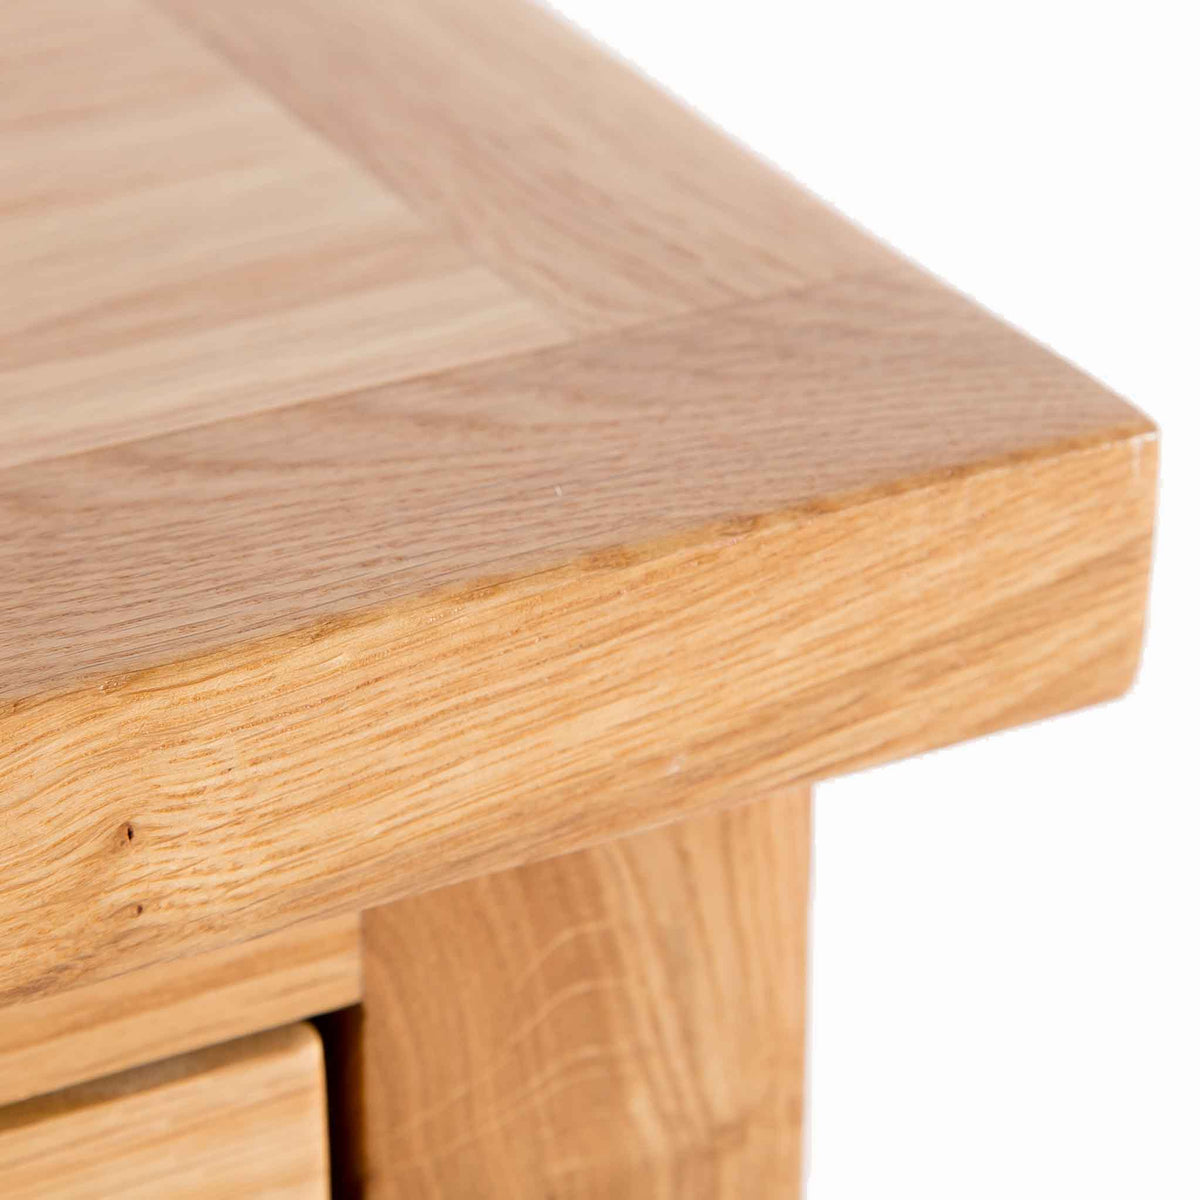 London Oak Tallboy Chest - Close up of the top corner of tallboy